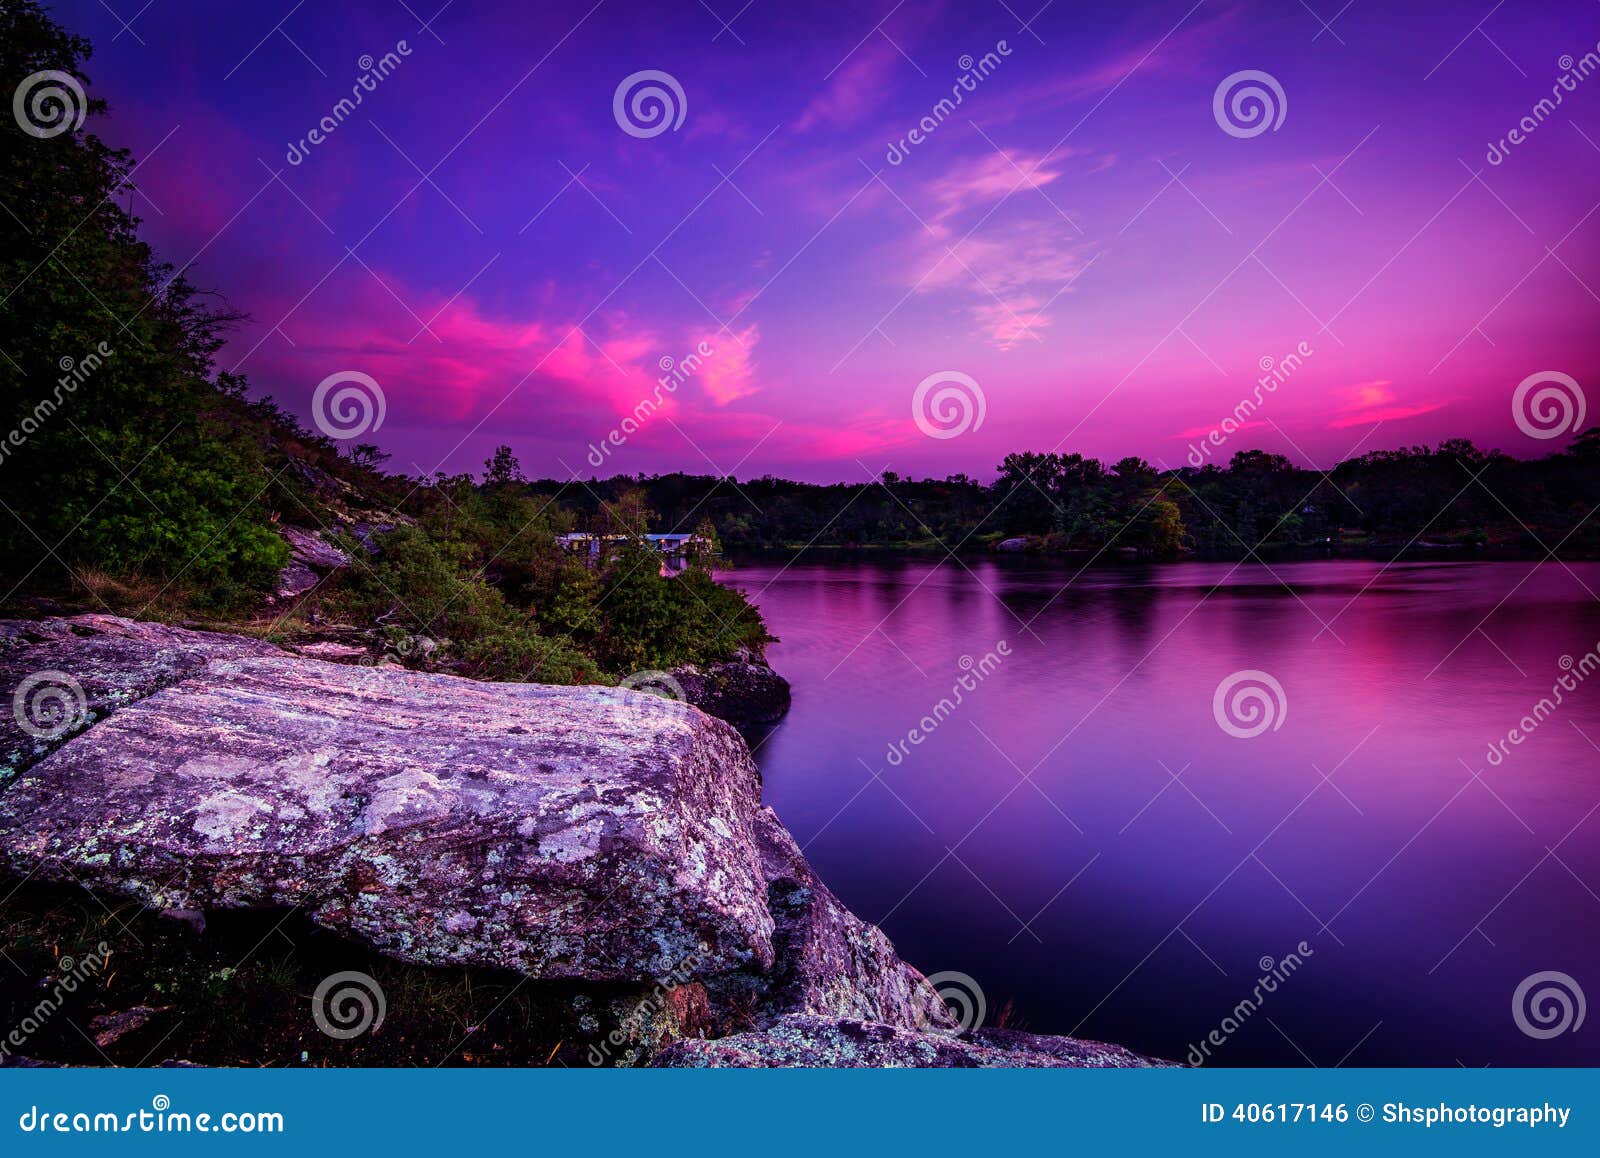 violet sunset over a calm lake